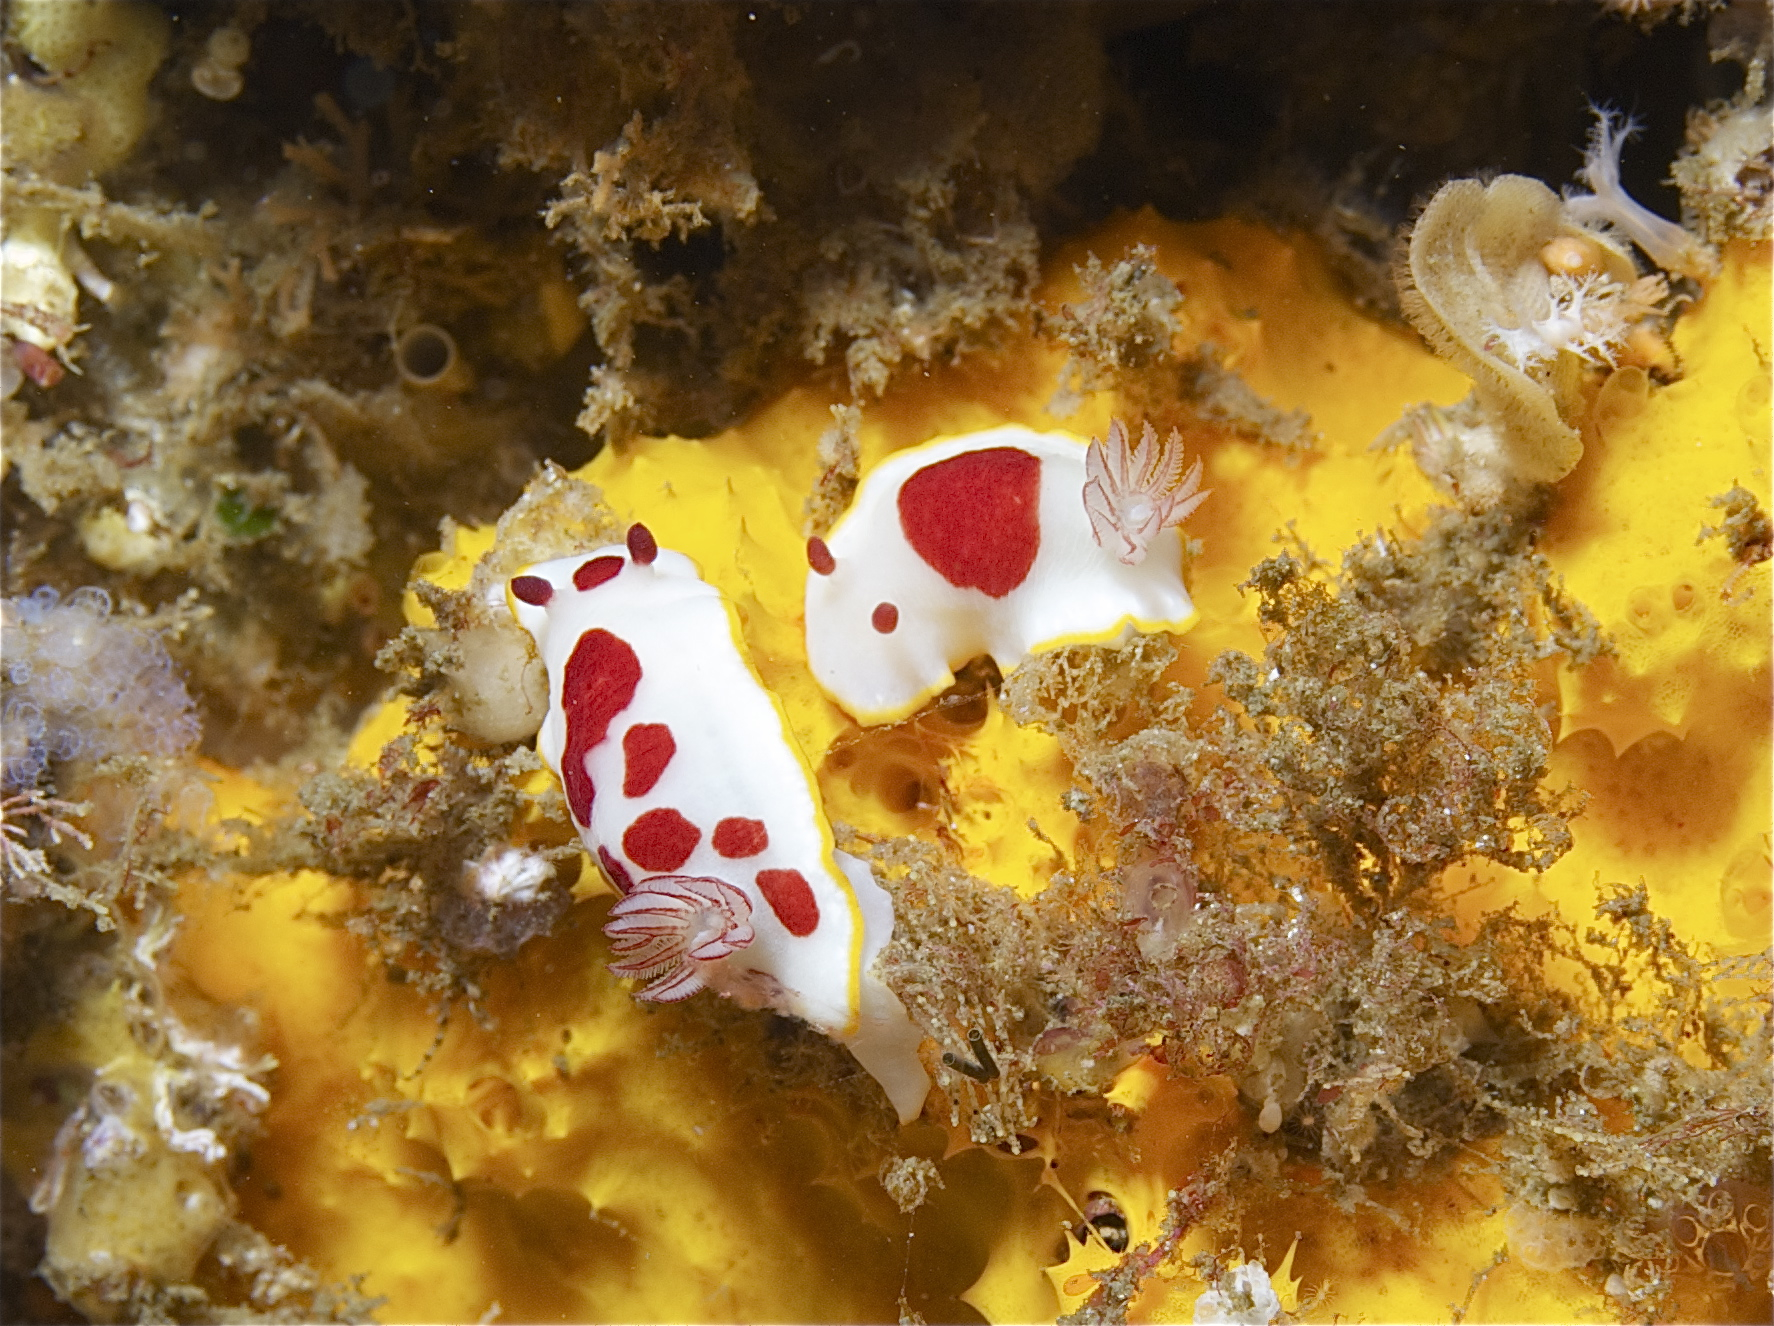 Goniobranchus_Splendidus. The red and white part of the pattern varies significantly, but fish have learned to look for the yellow circle - which is consistent. Photo: Steve Clay